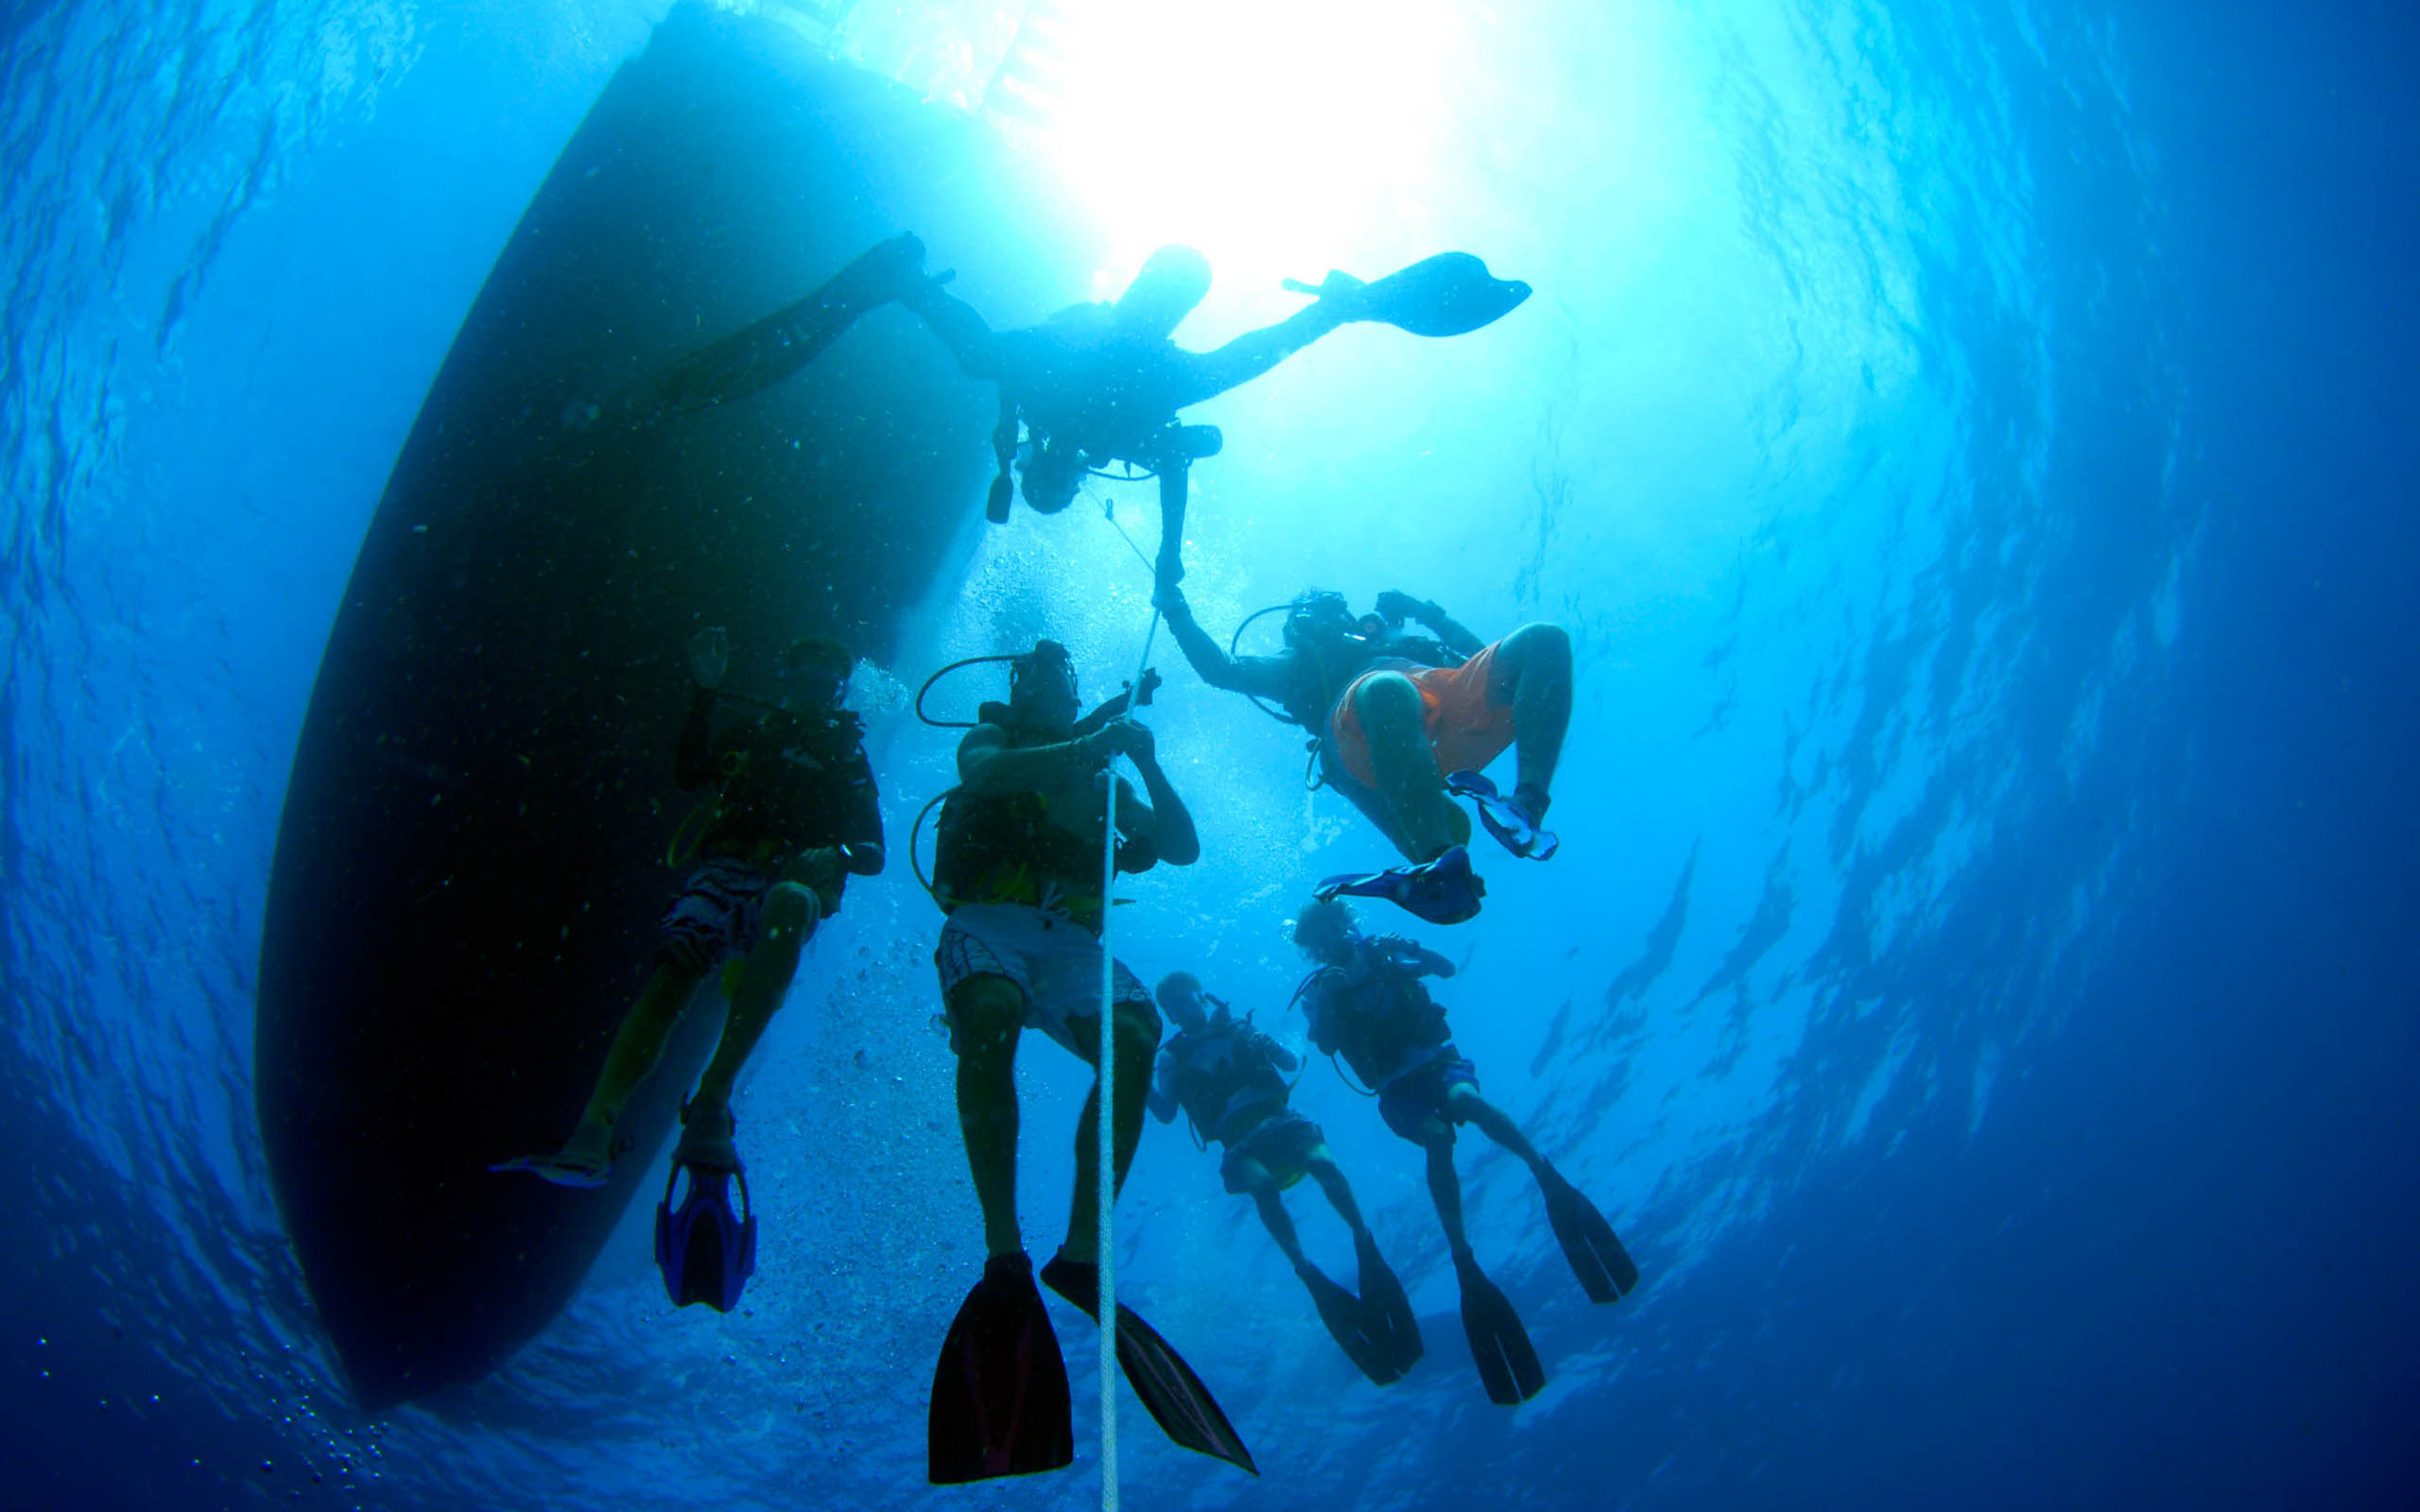 A group of people scuba diving near a boat.